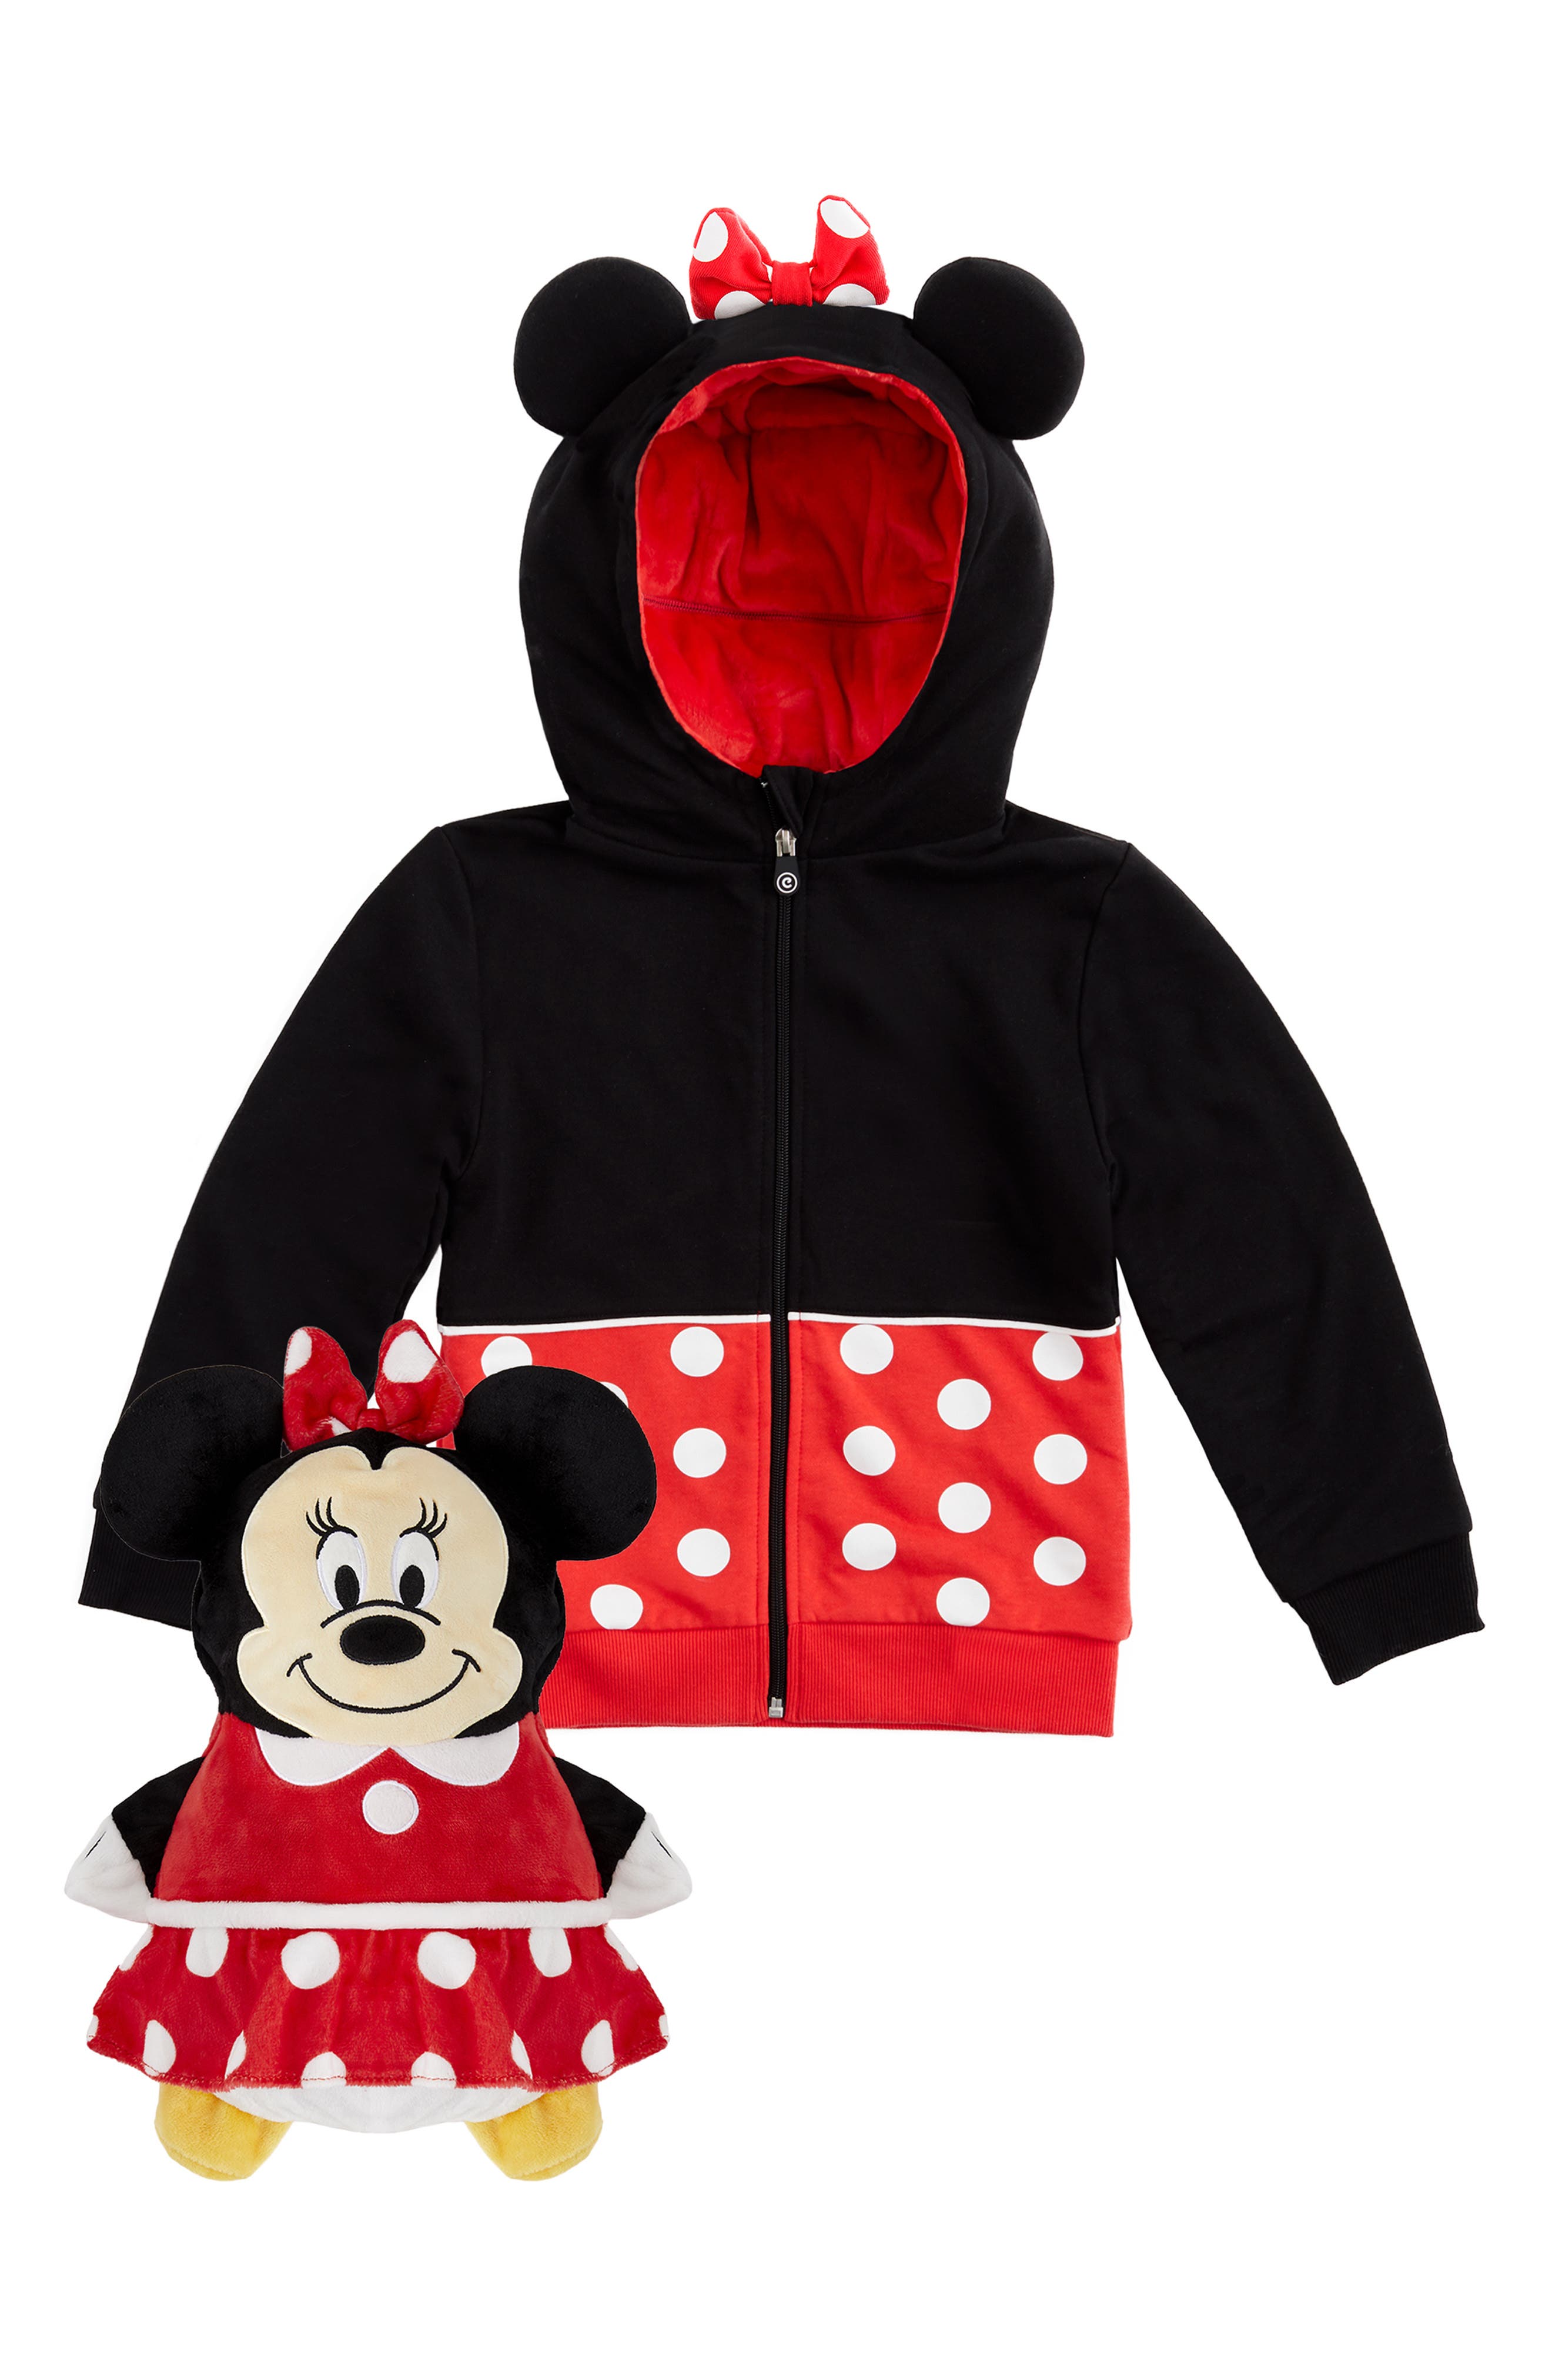 minnie mouse gifts for toddlers